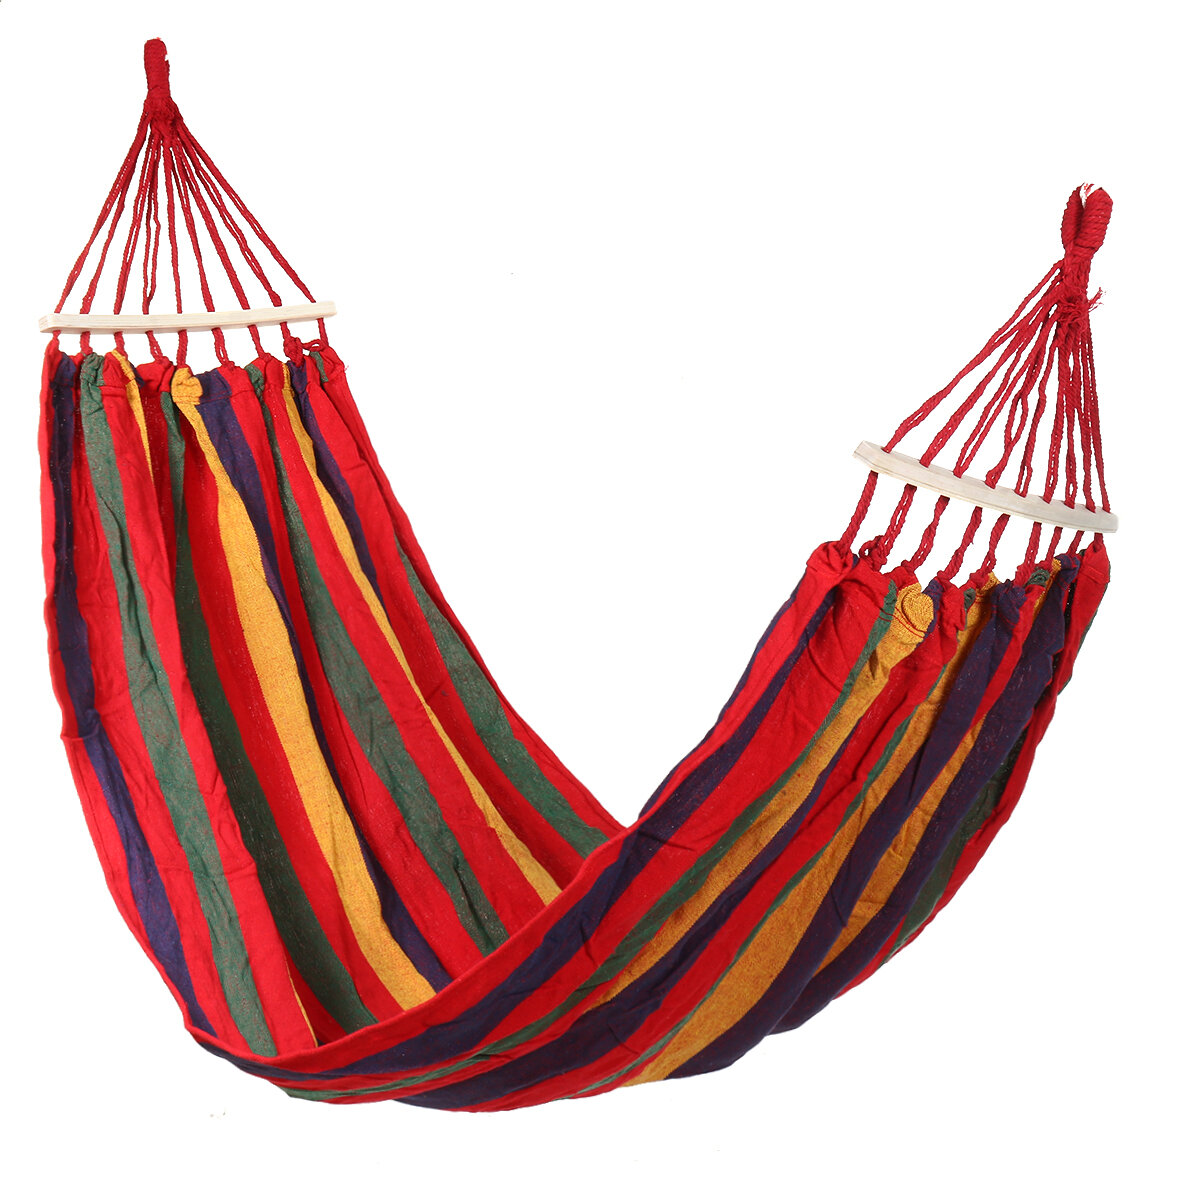 Portable Garden Outdoor Camping Canvas Hammock Travel Swing Hang Bed Red New 